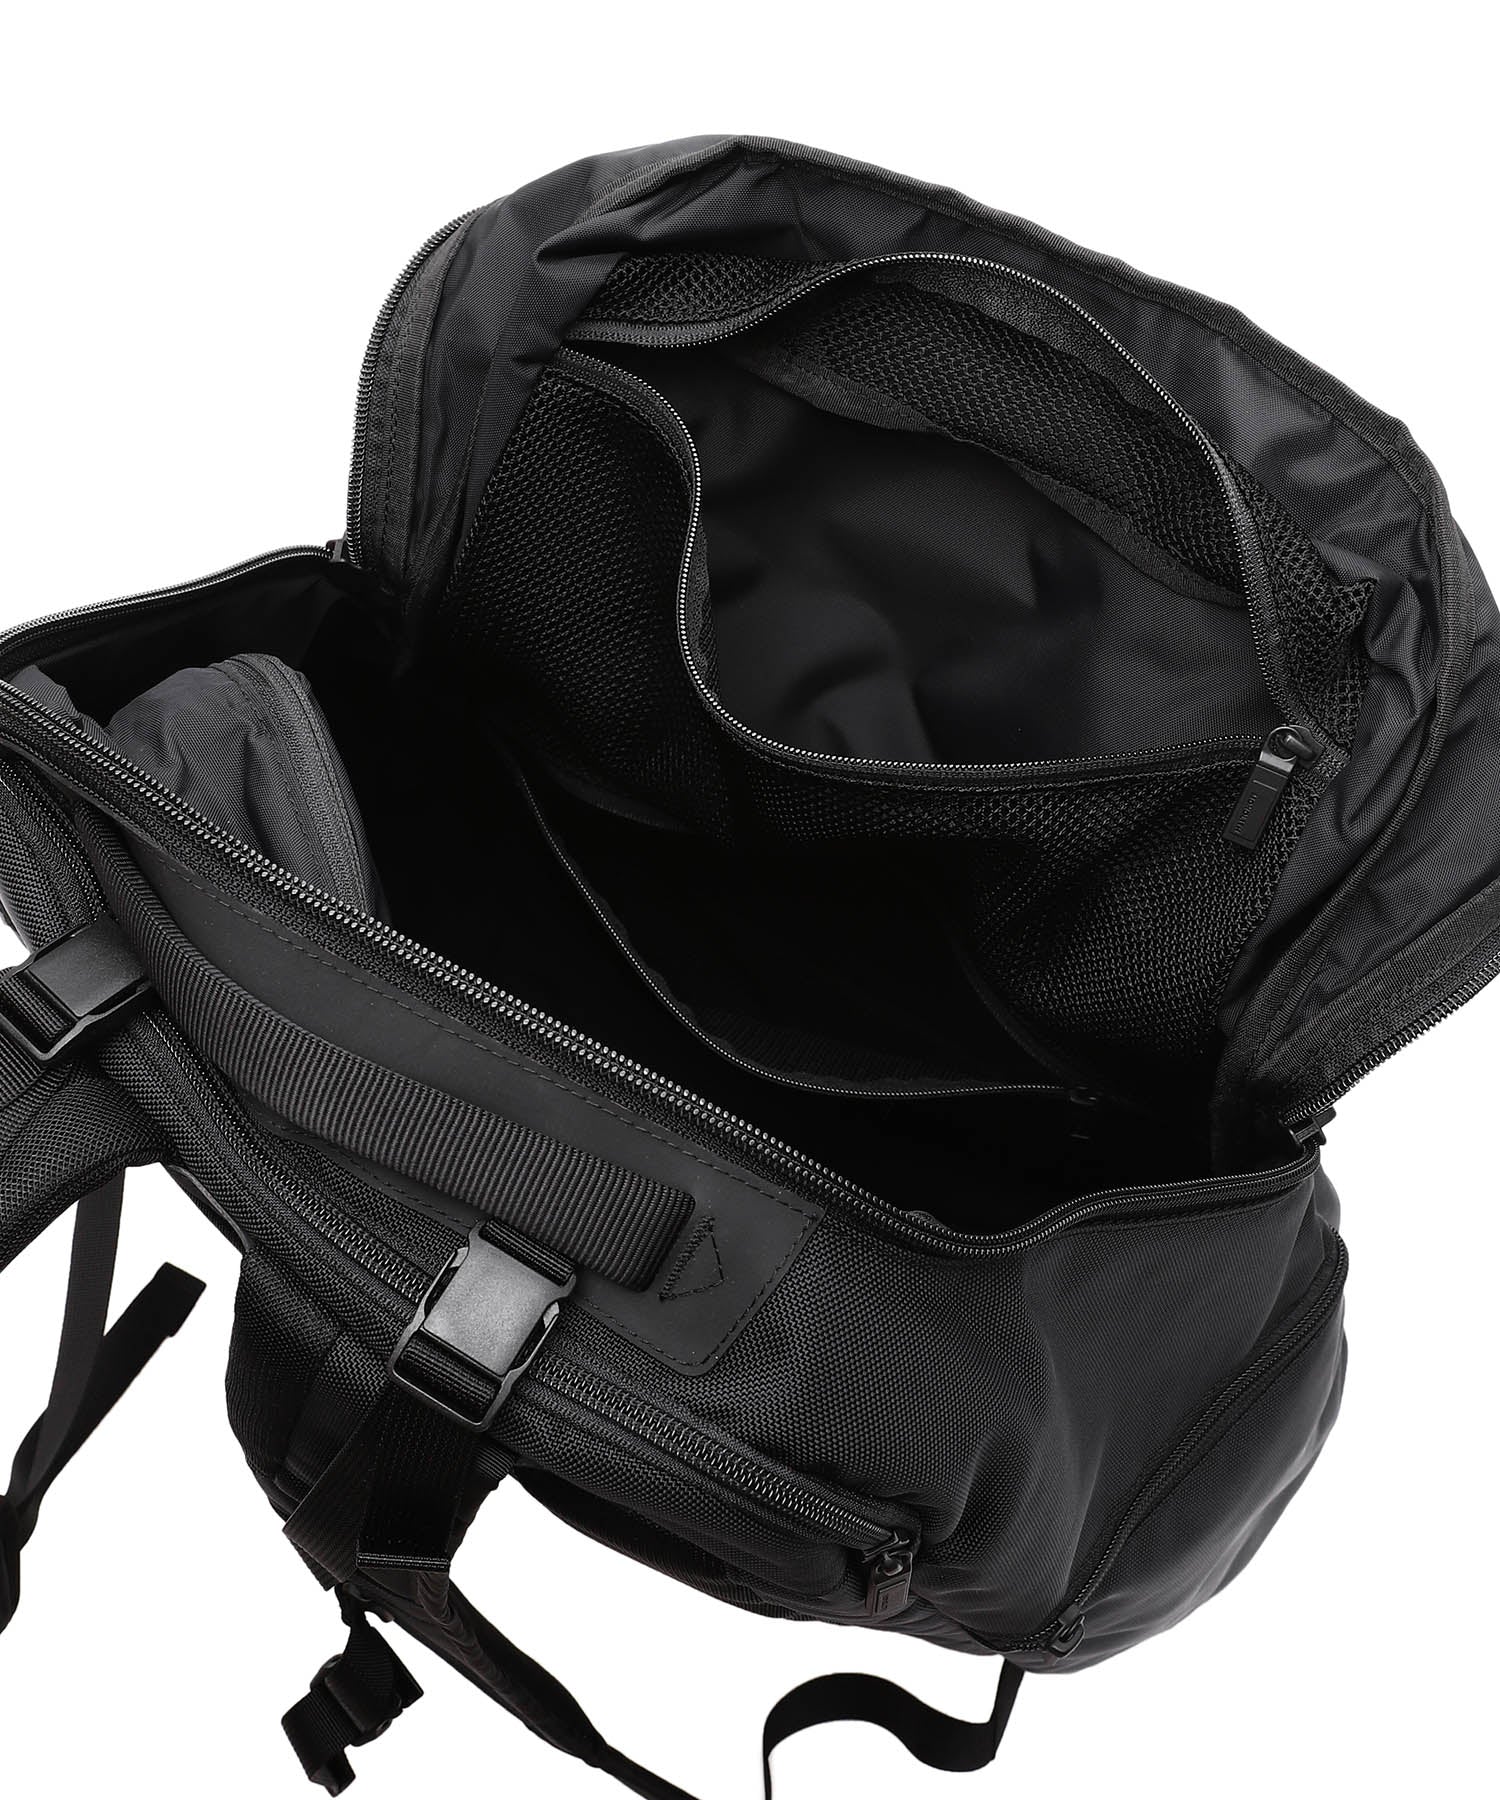 BACKPACK PRO STORAGE XL - MONOLITH (モノリス) - bag (バッグ 